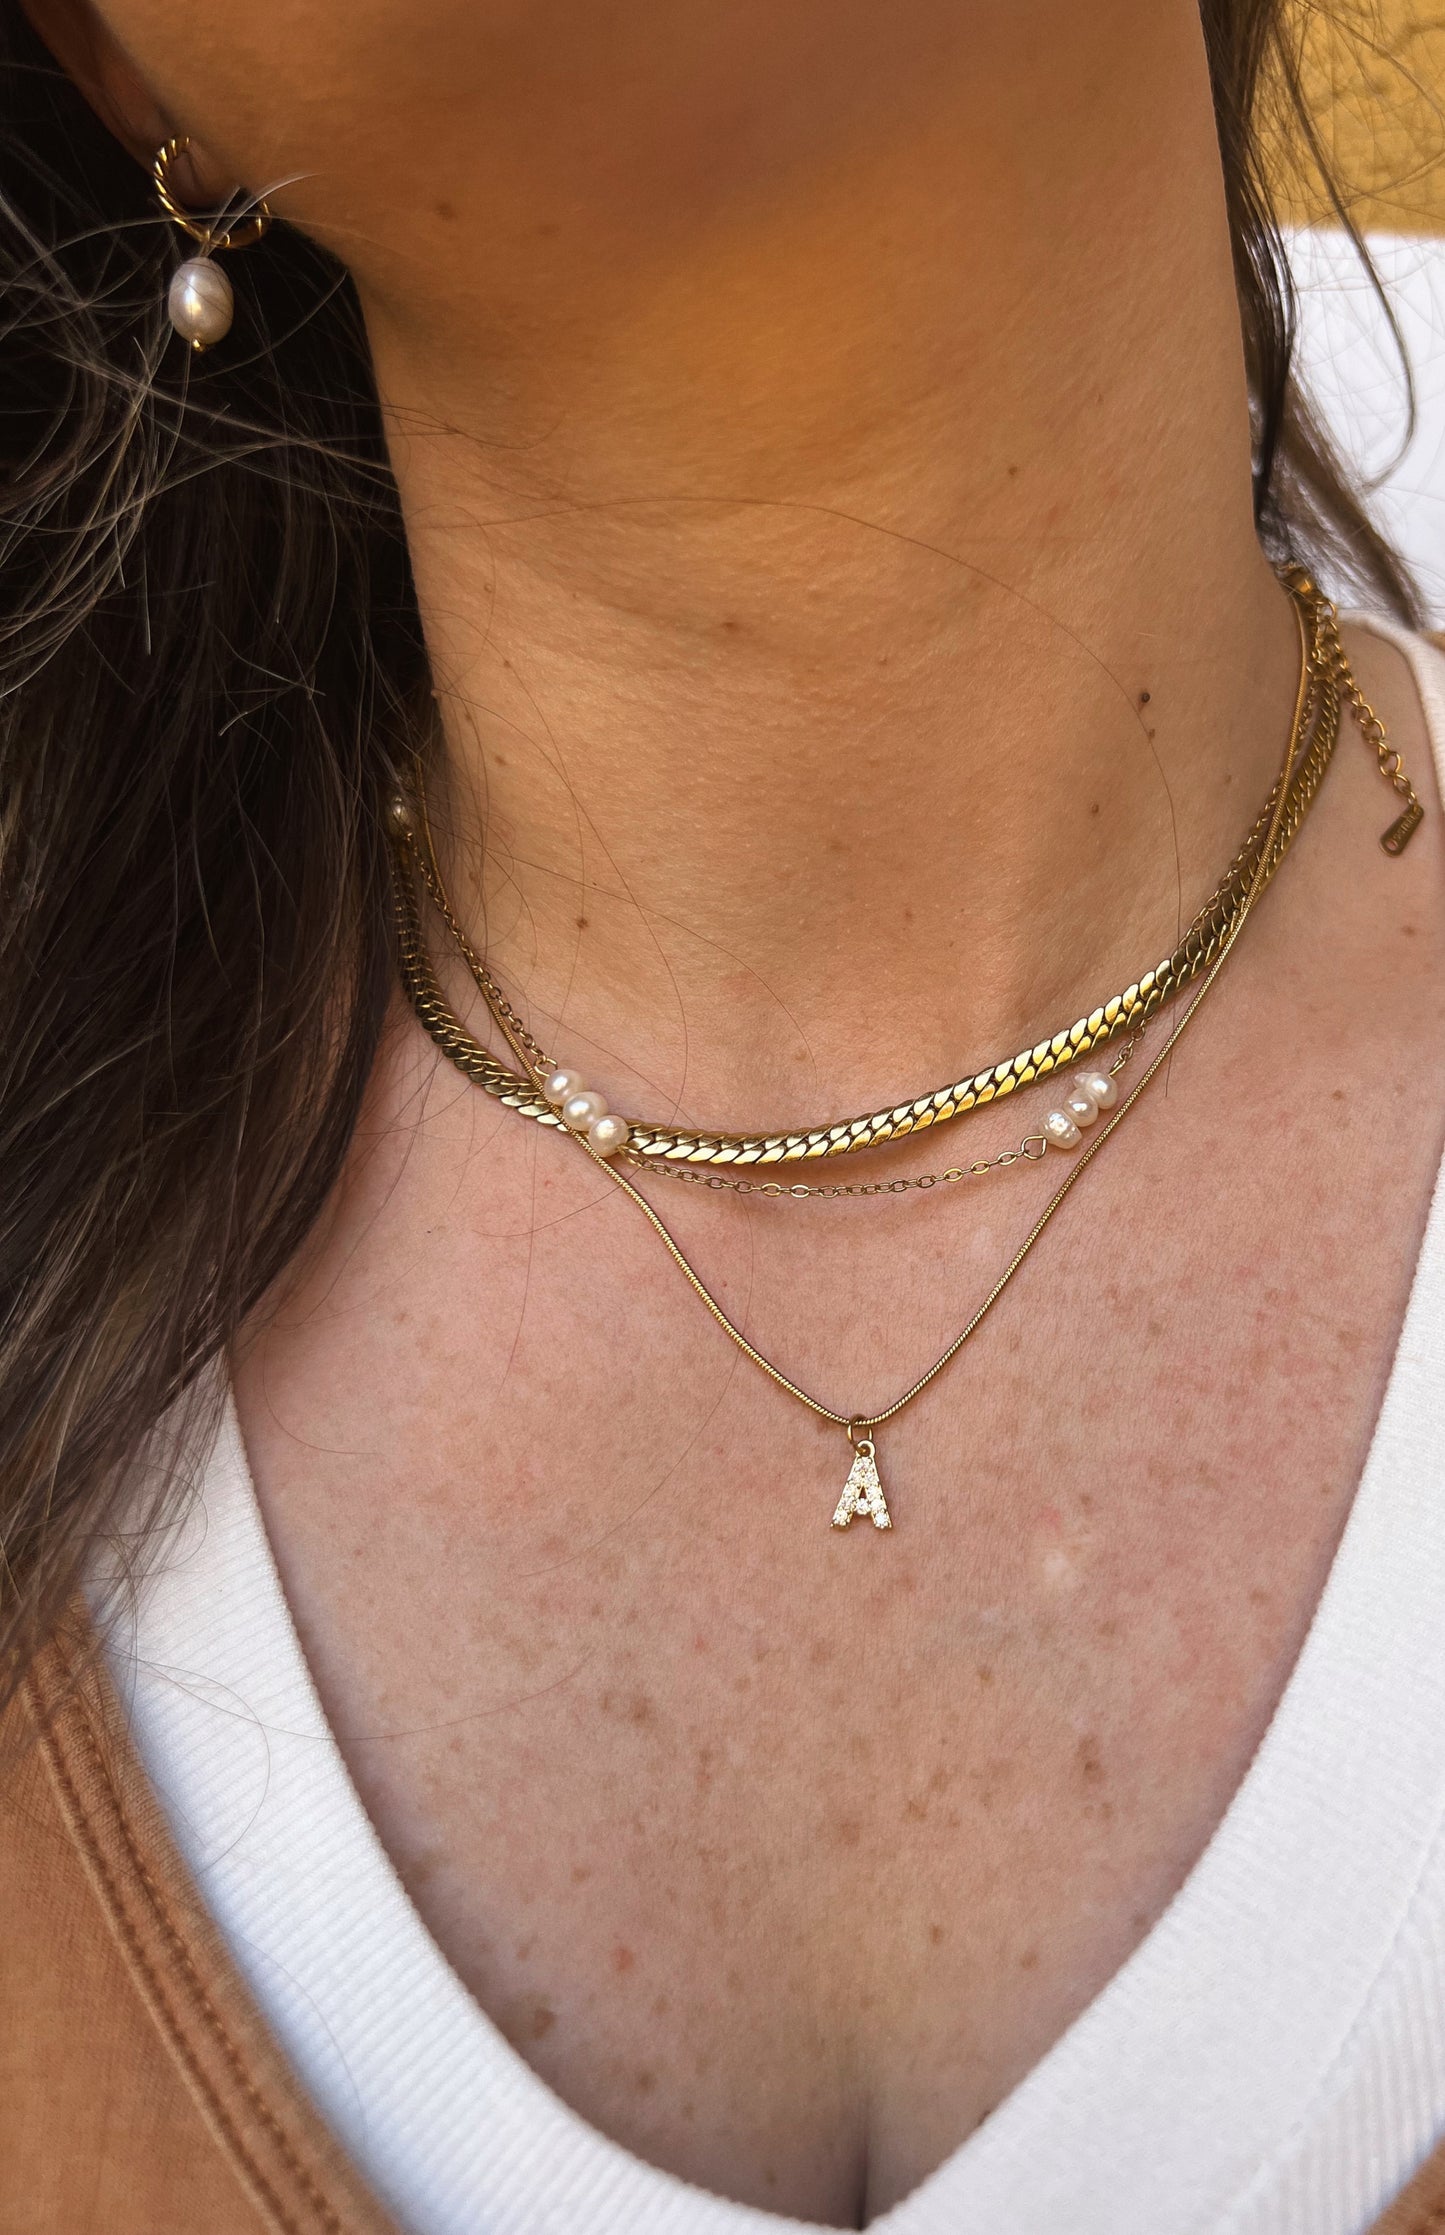 Dainty pavé initial necklace